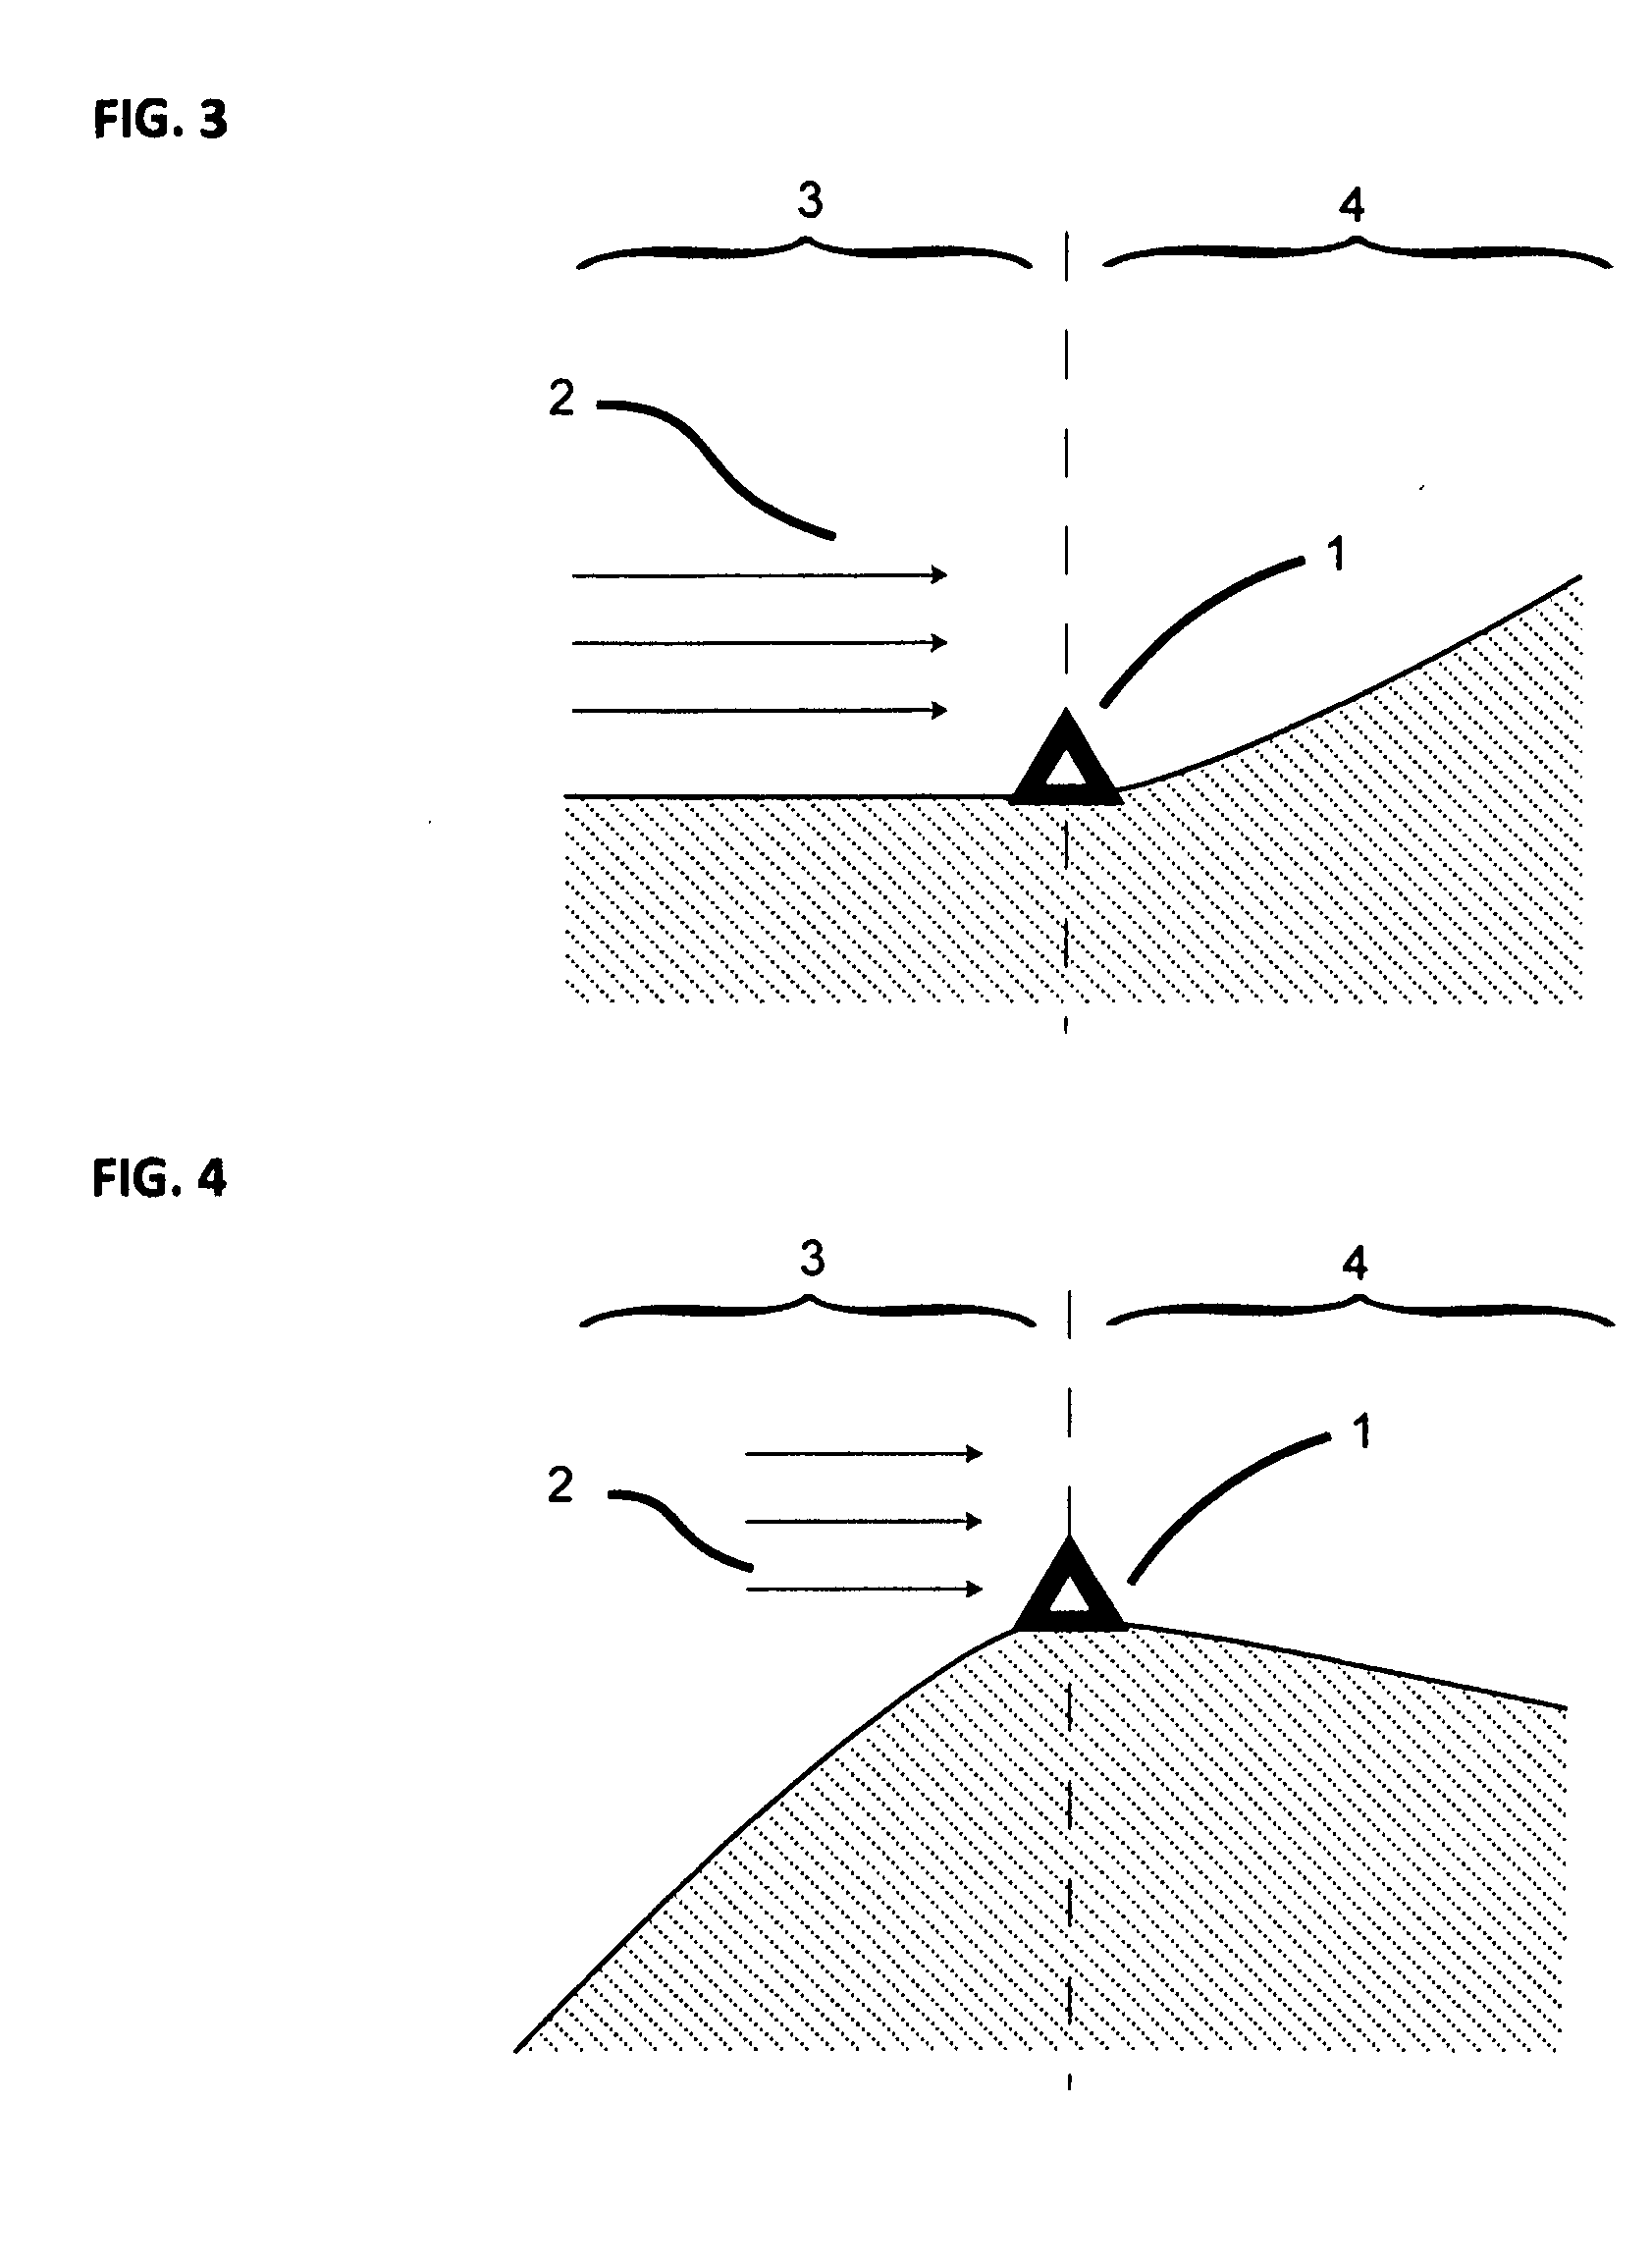 Method of evaluation wind flow based on conservation of momentum and variation in terrain